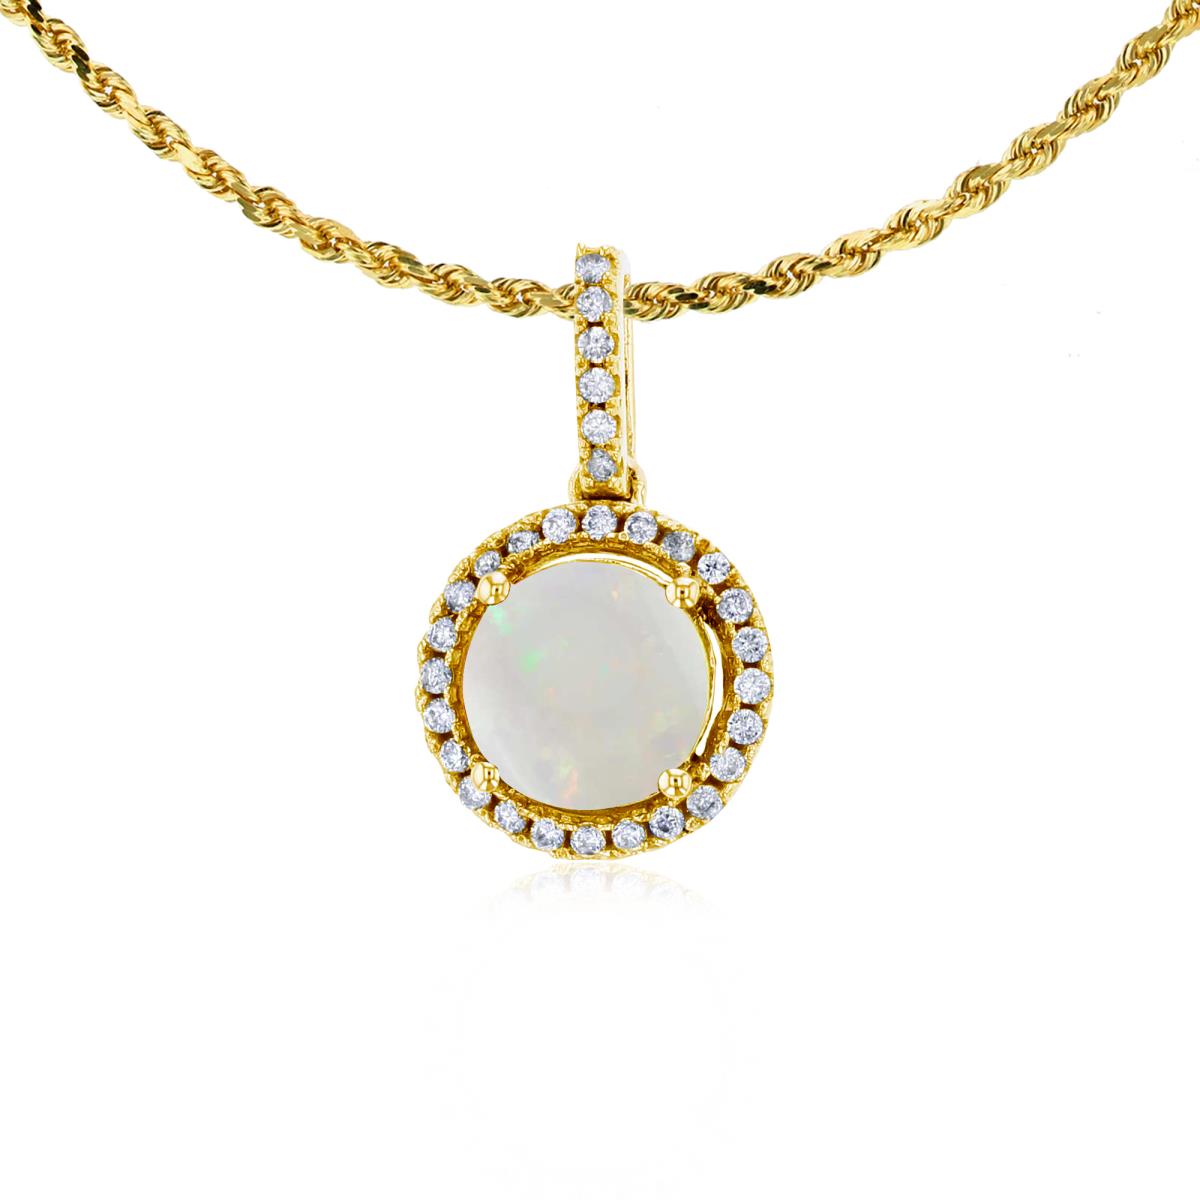 10K Yellow Gold 7mm Round Opal & 0.15 CTTW Round Diamonds Halo 18" Rope Chain Necklace